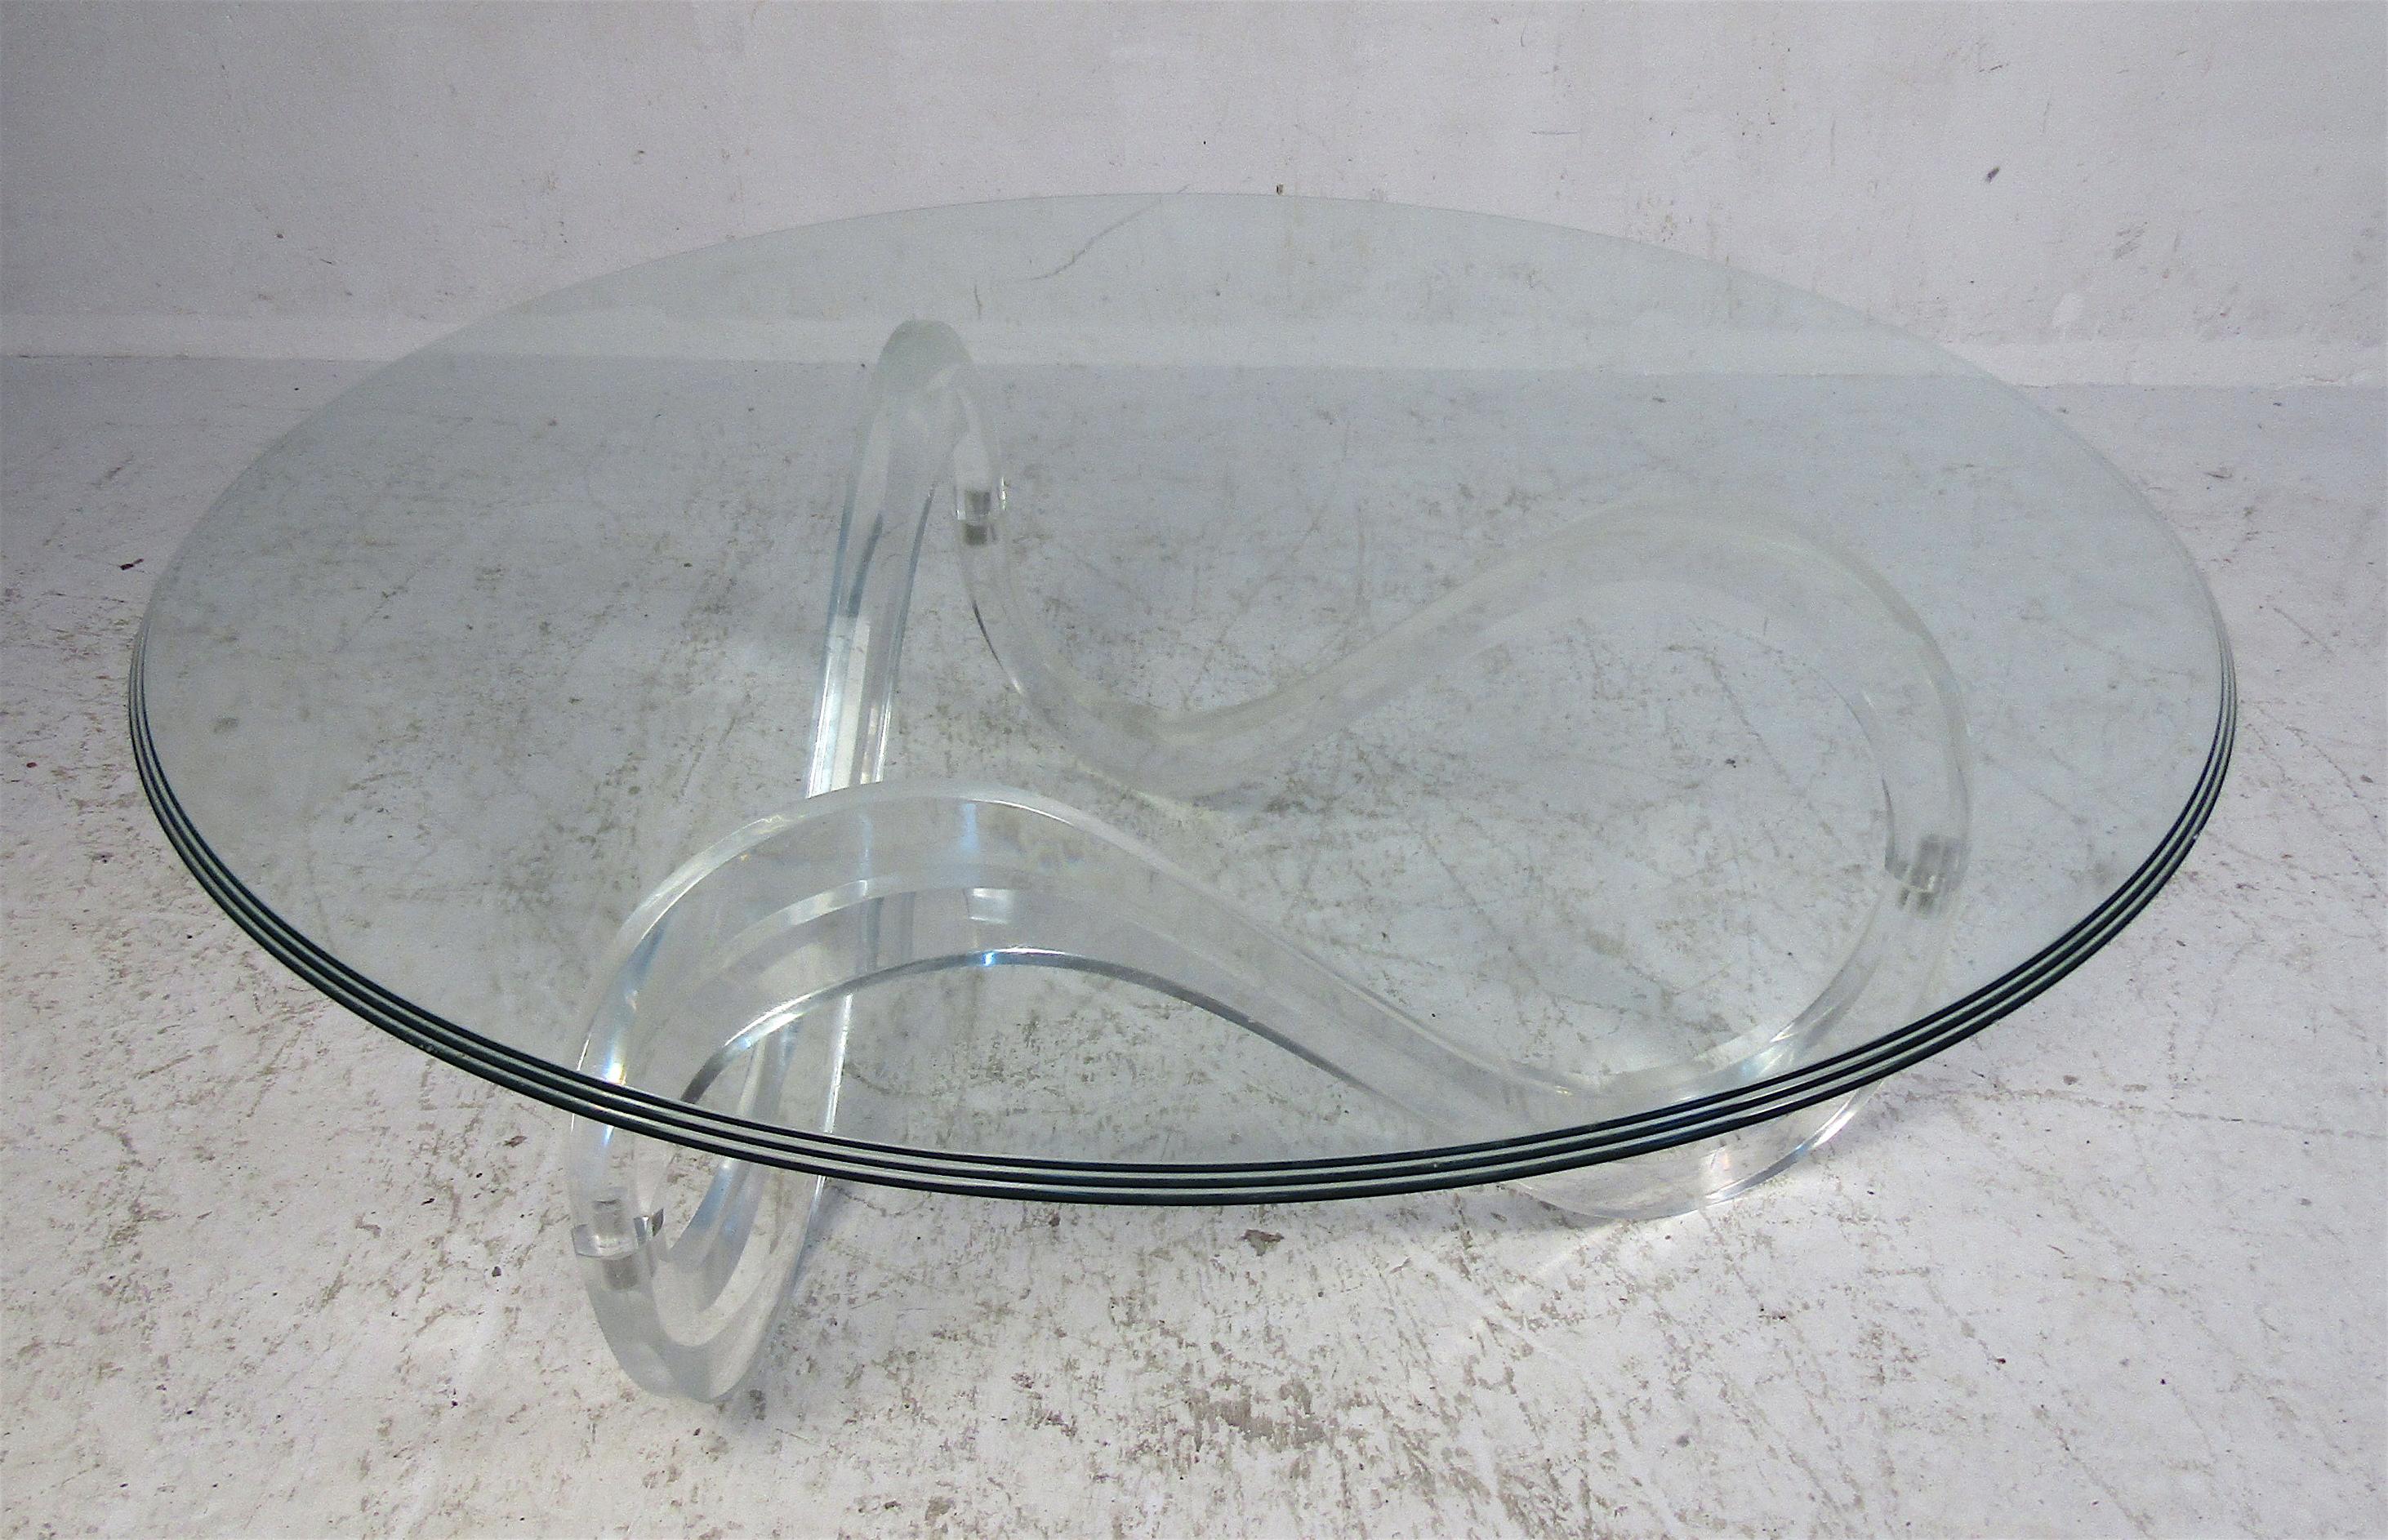 This stunning vintage modern coffee table features an unusual Lucite base with a thick round glass top. A sleek design with sculpted Lucite and circular glass with graduating edges. This stylish coffee table is sure to complement any home, business,